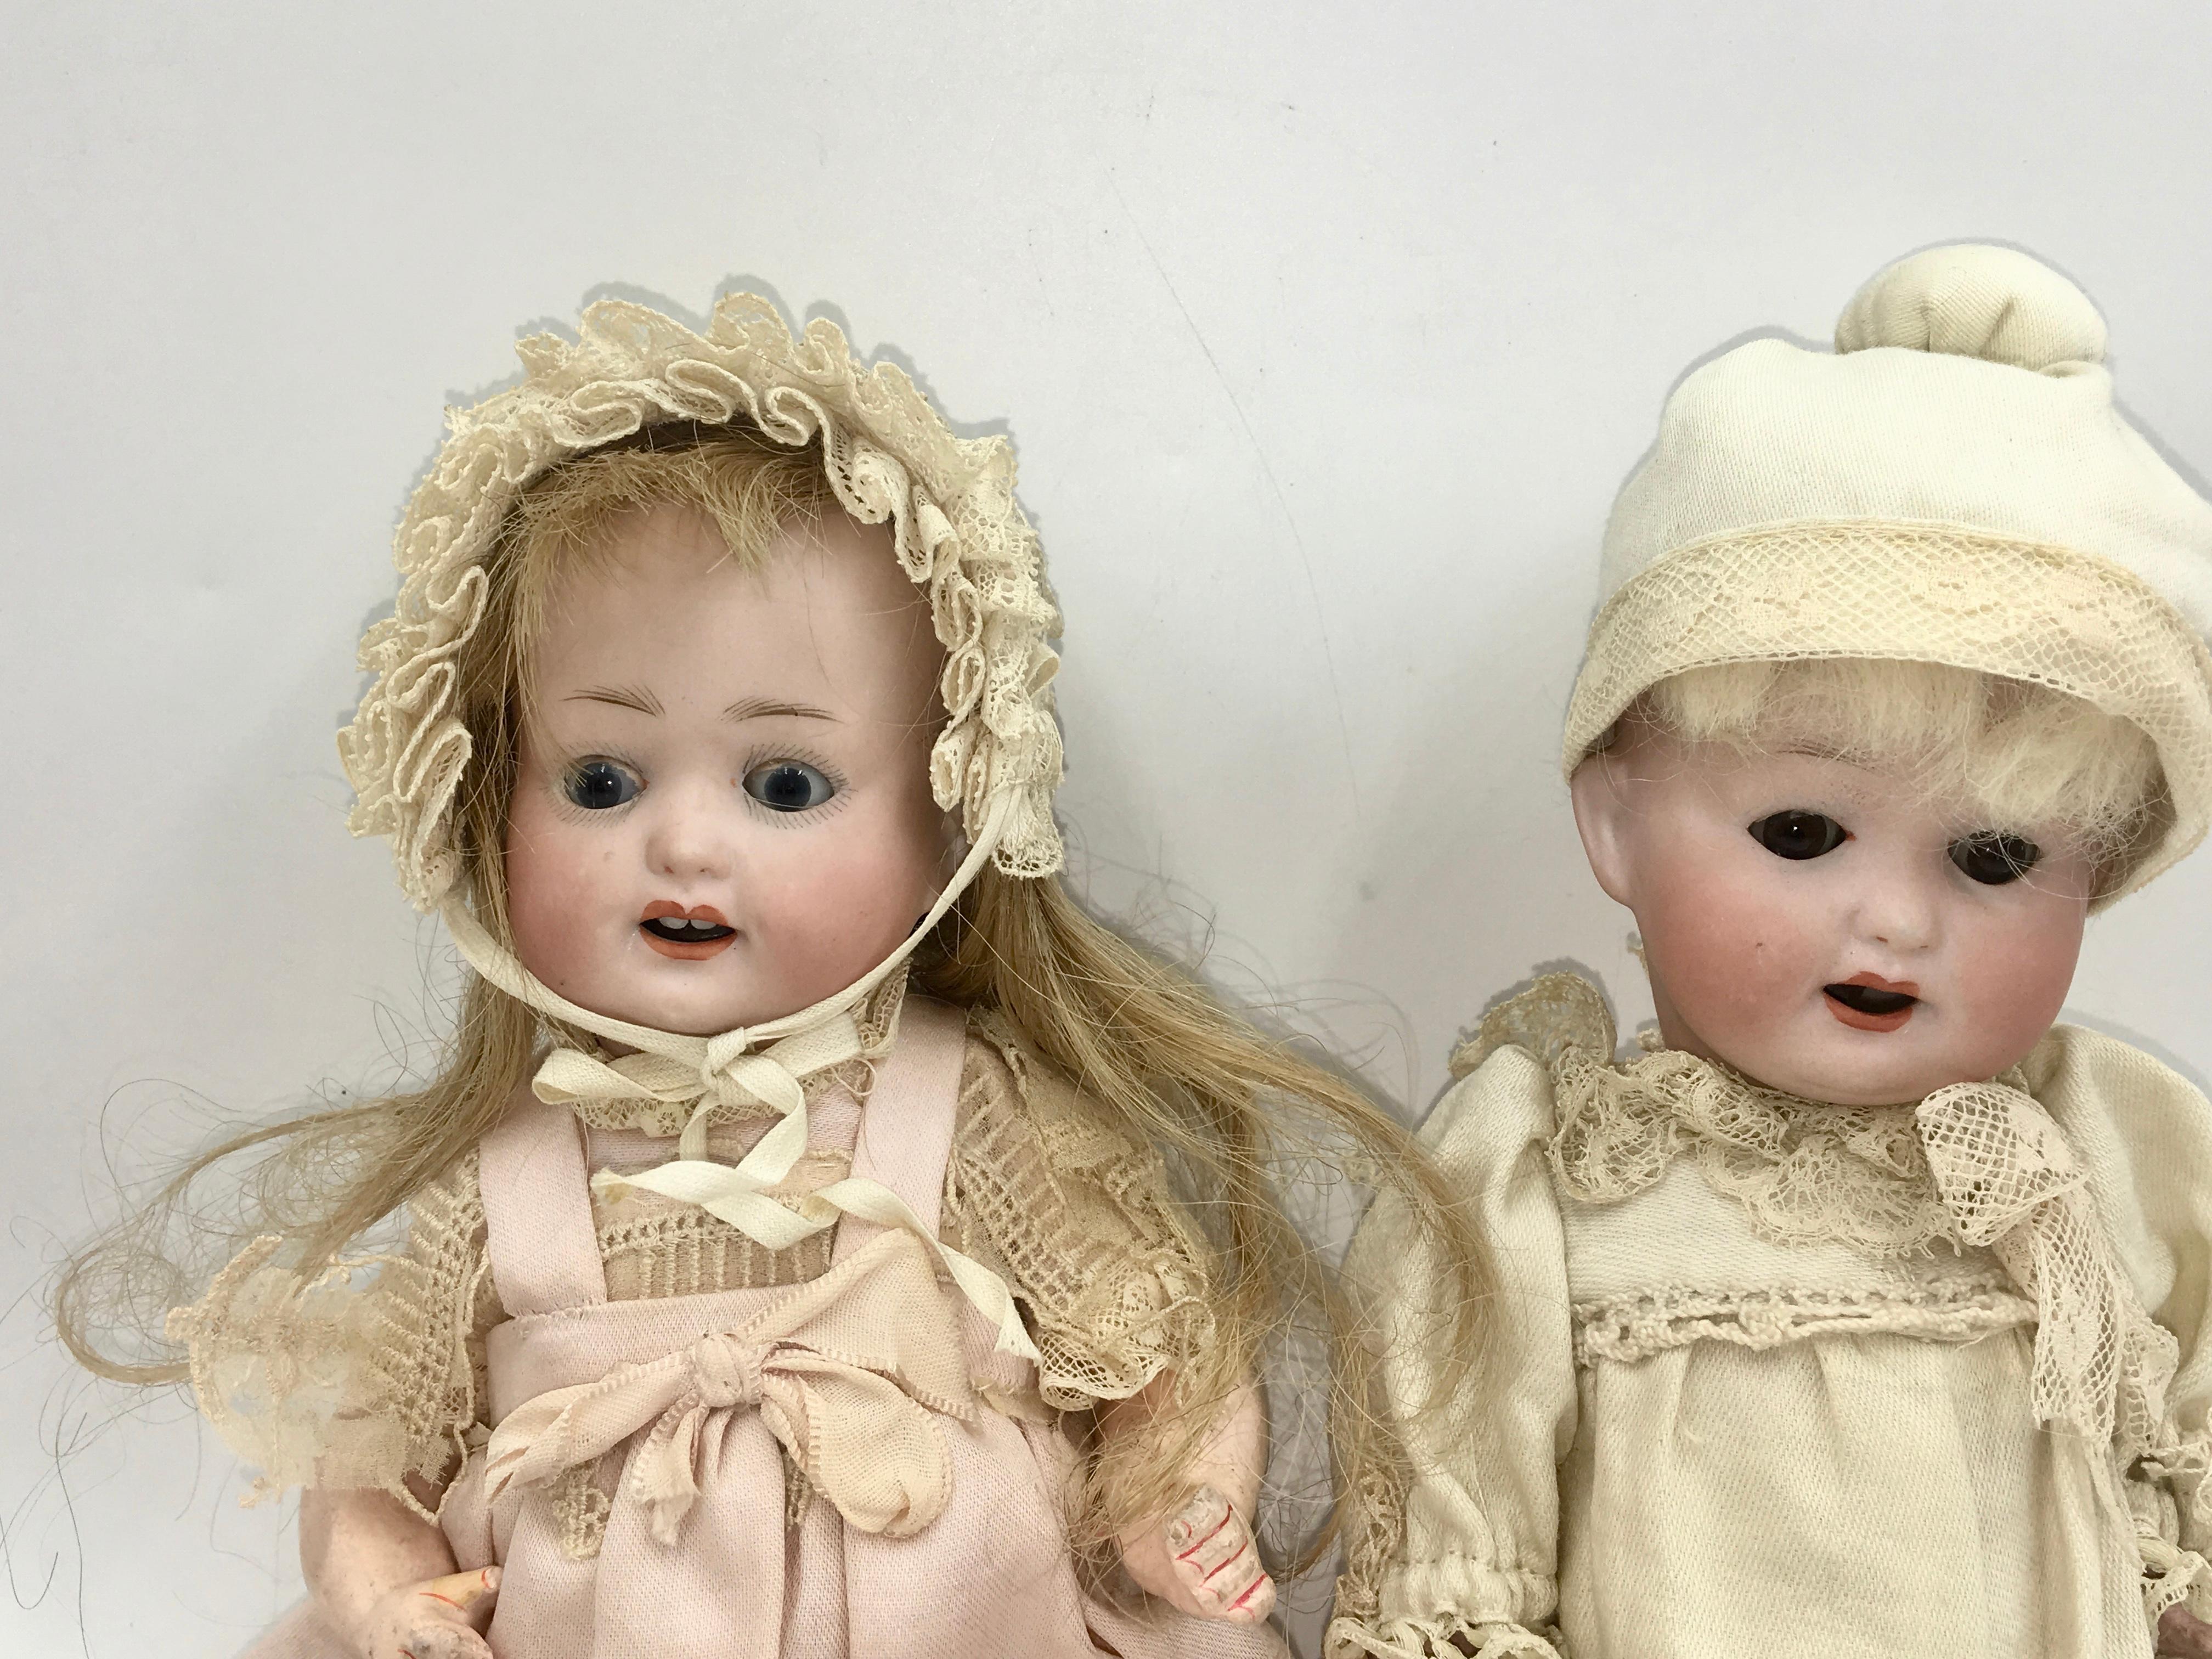 German character girl and boy marked: Heubach Köppelsdorf Germany 
Bisque head, girl with blue sleep eyes, open mouth with two teeth; boy with brown sleep eyes, open mouth with two teeth.

Baby body 23 cm, dressed in old clothing with old bonnet